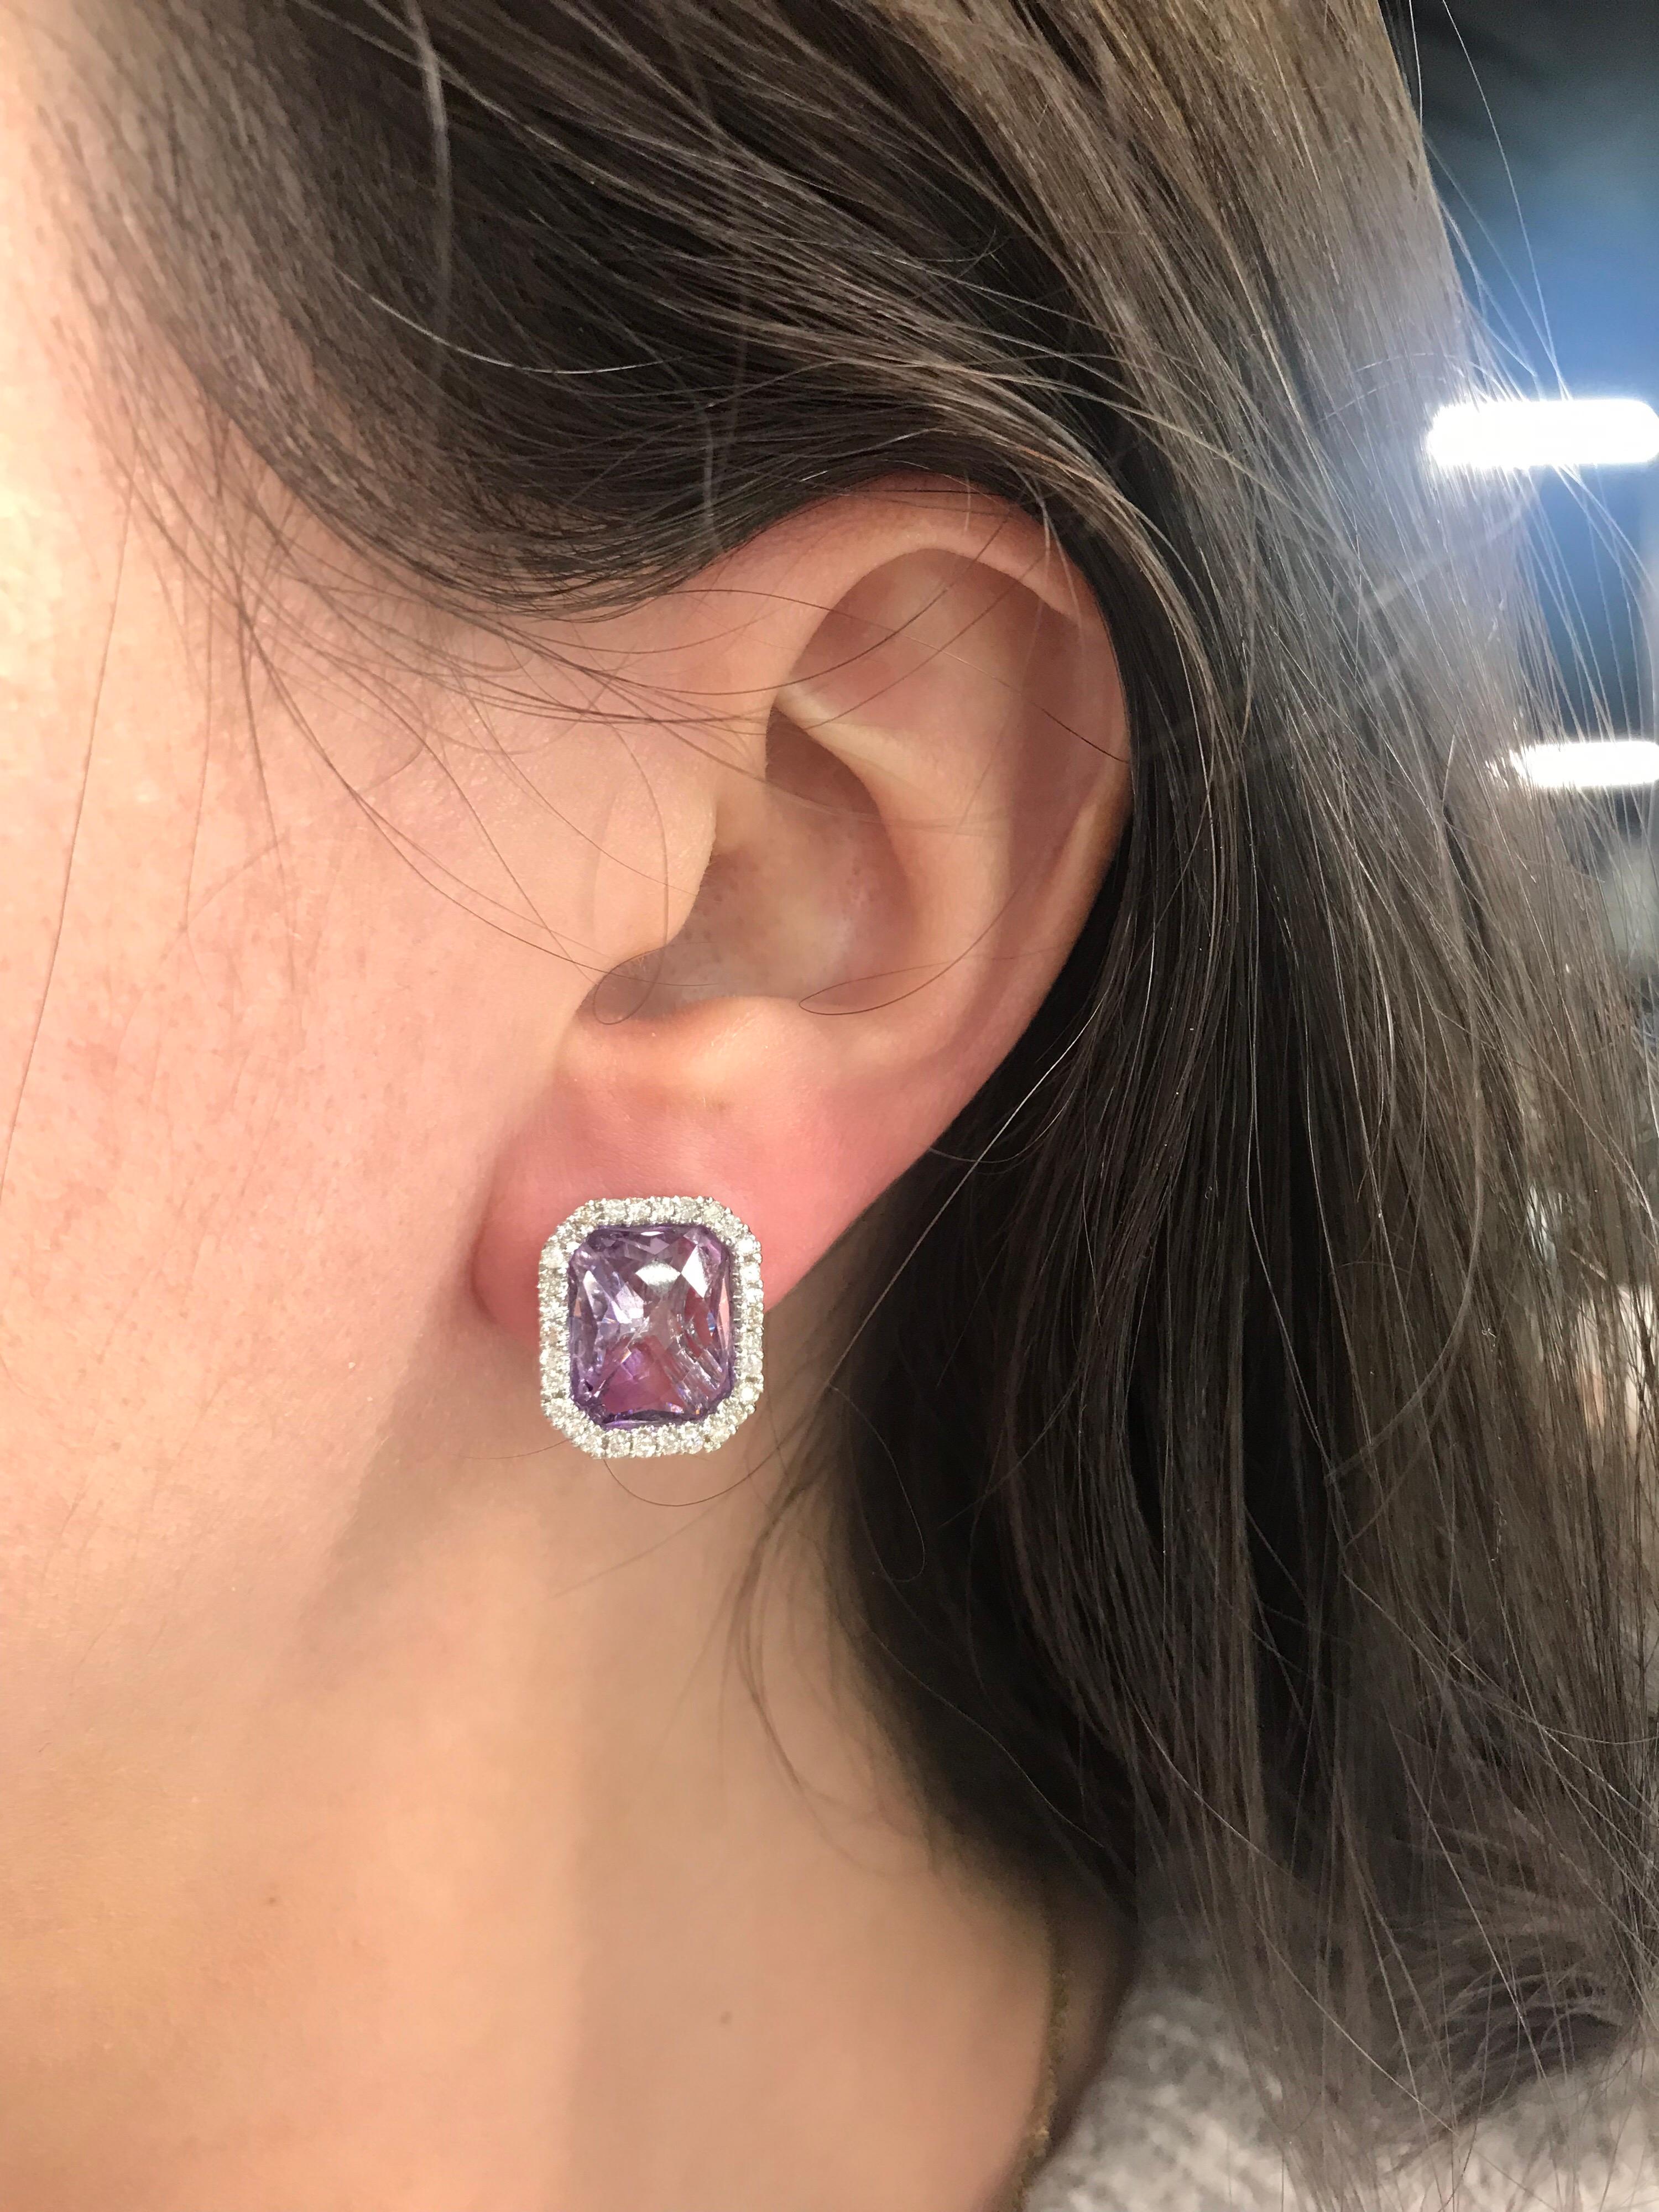 14K White gold stud earrings featuring two cushion Amethysts measuring 11 * 10 mm flanked with round brilliants 0.55 carats.

Comes in a few different gemstones. 